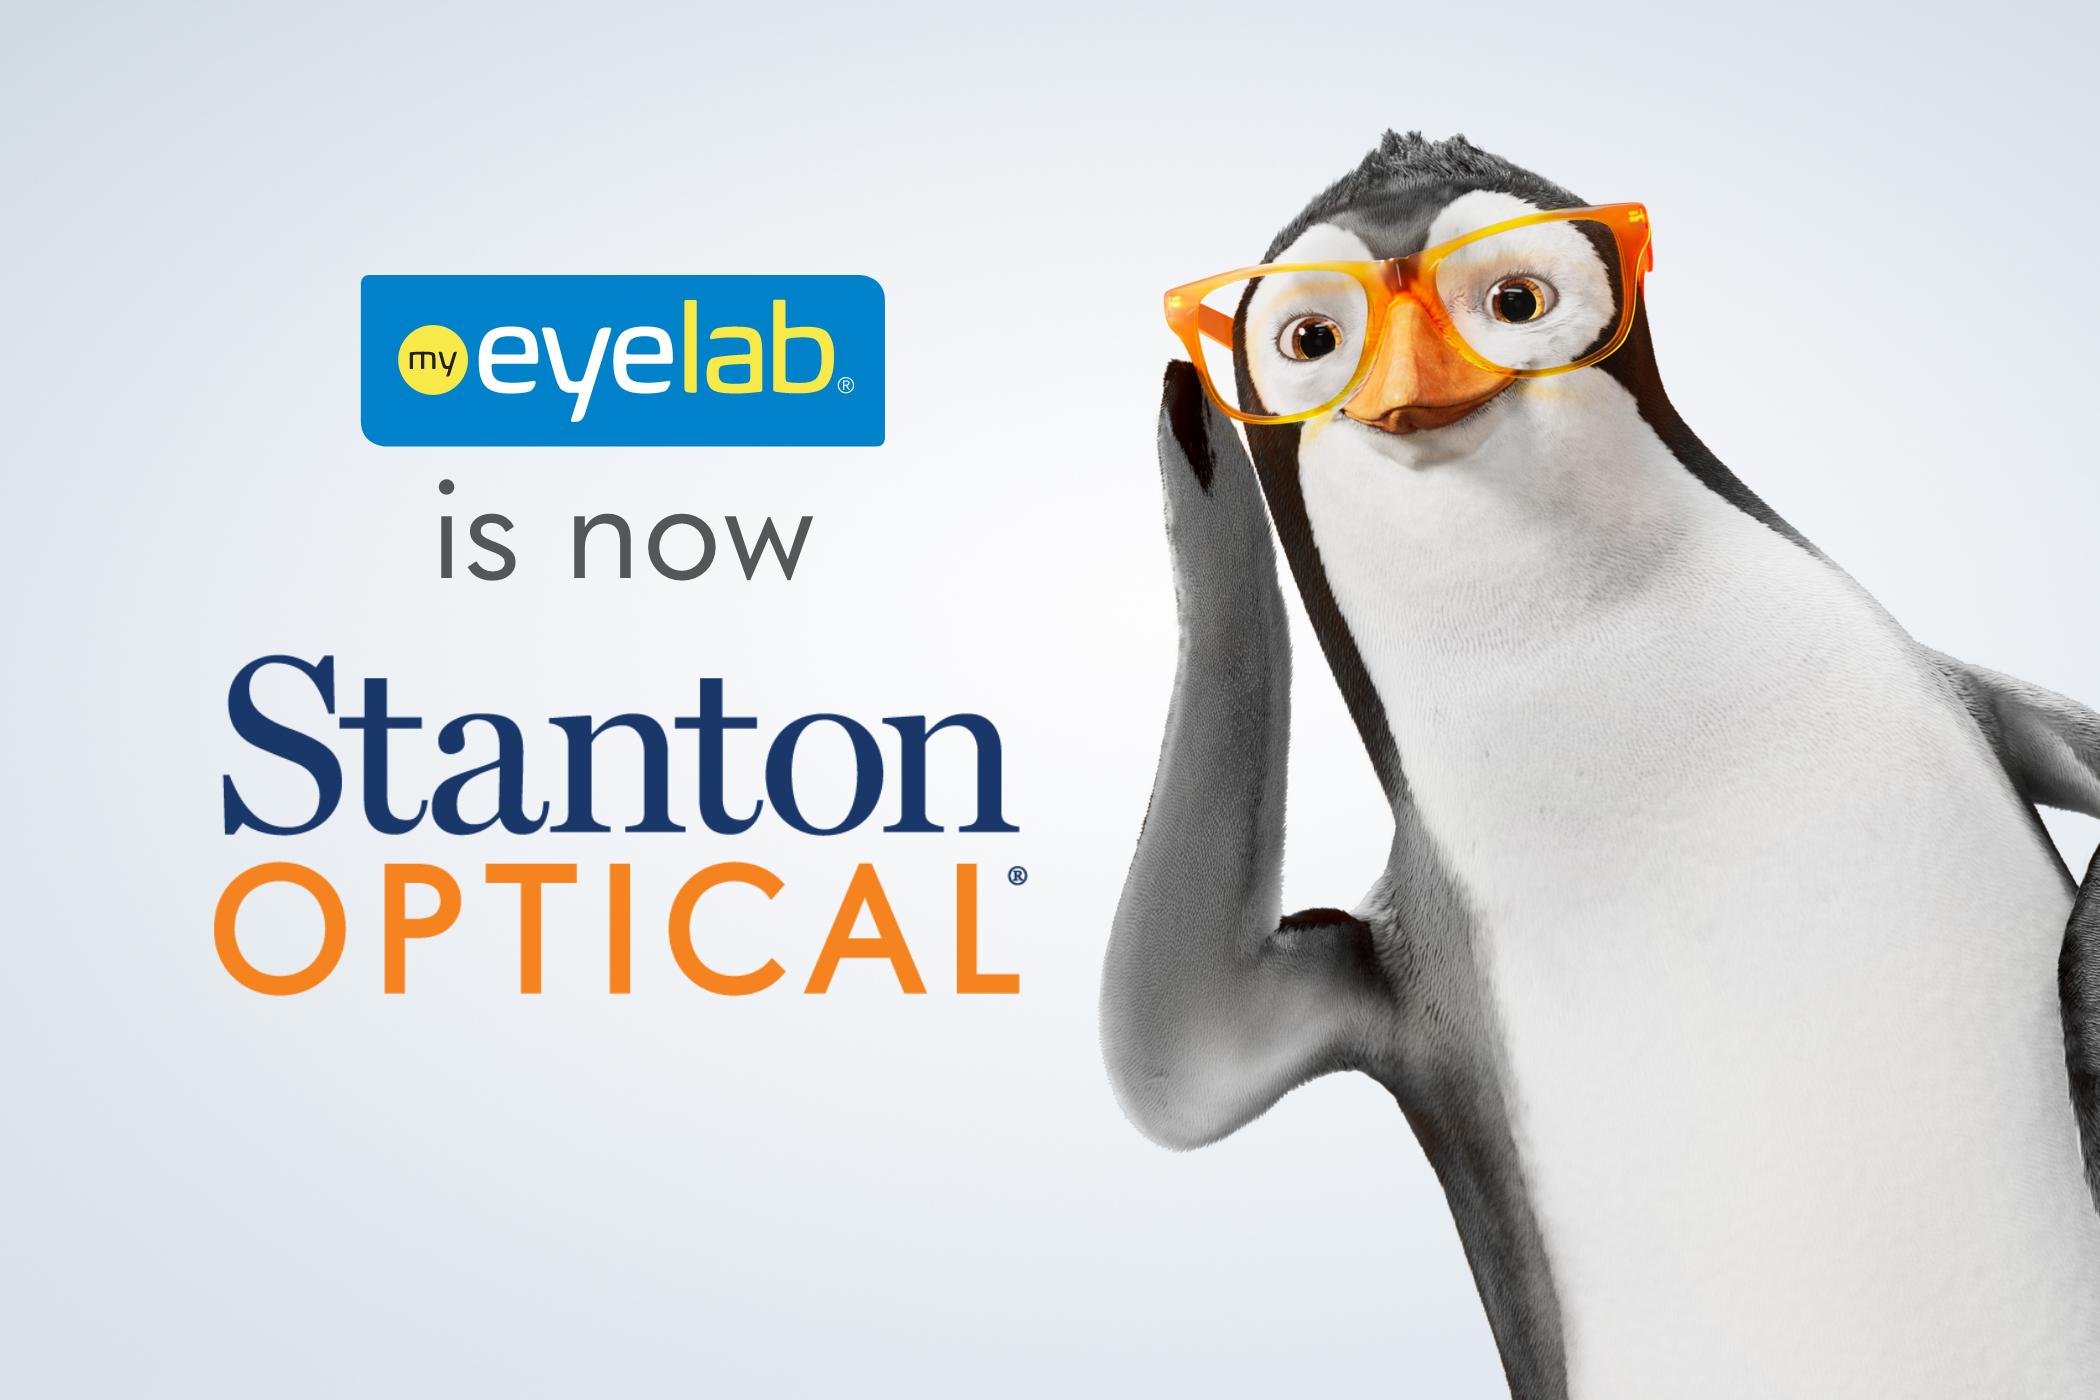 My Eyelab is now Stanton Optical! Faster service and better value at the same convenient location.​